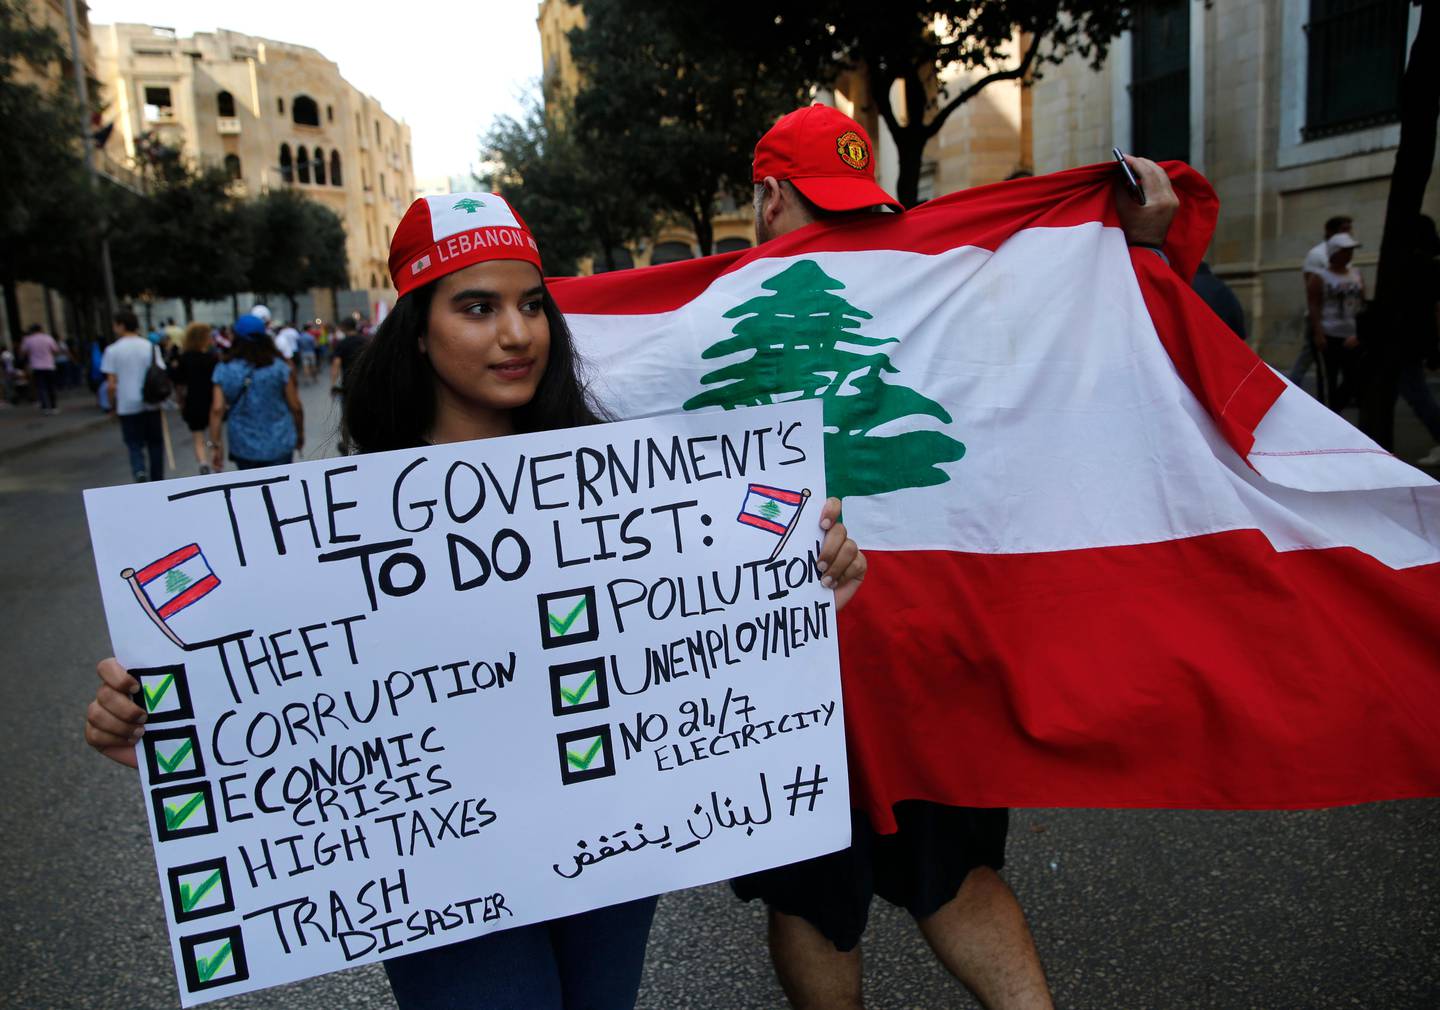 Protesters hold banners during a demonstration in Beirut, Lebanon, Sunday, Oct. 20, 2019. Protests erupted in Lebanon over the last couple of days after the government proposed new taxes criticized for hitting low-income groups the hardest. (AP Photo/Hussein Malla)